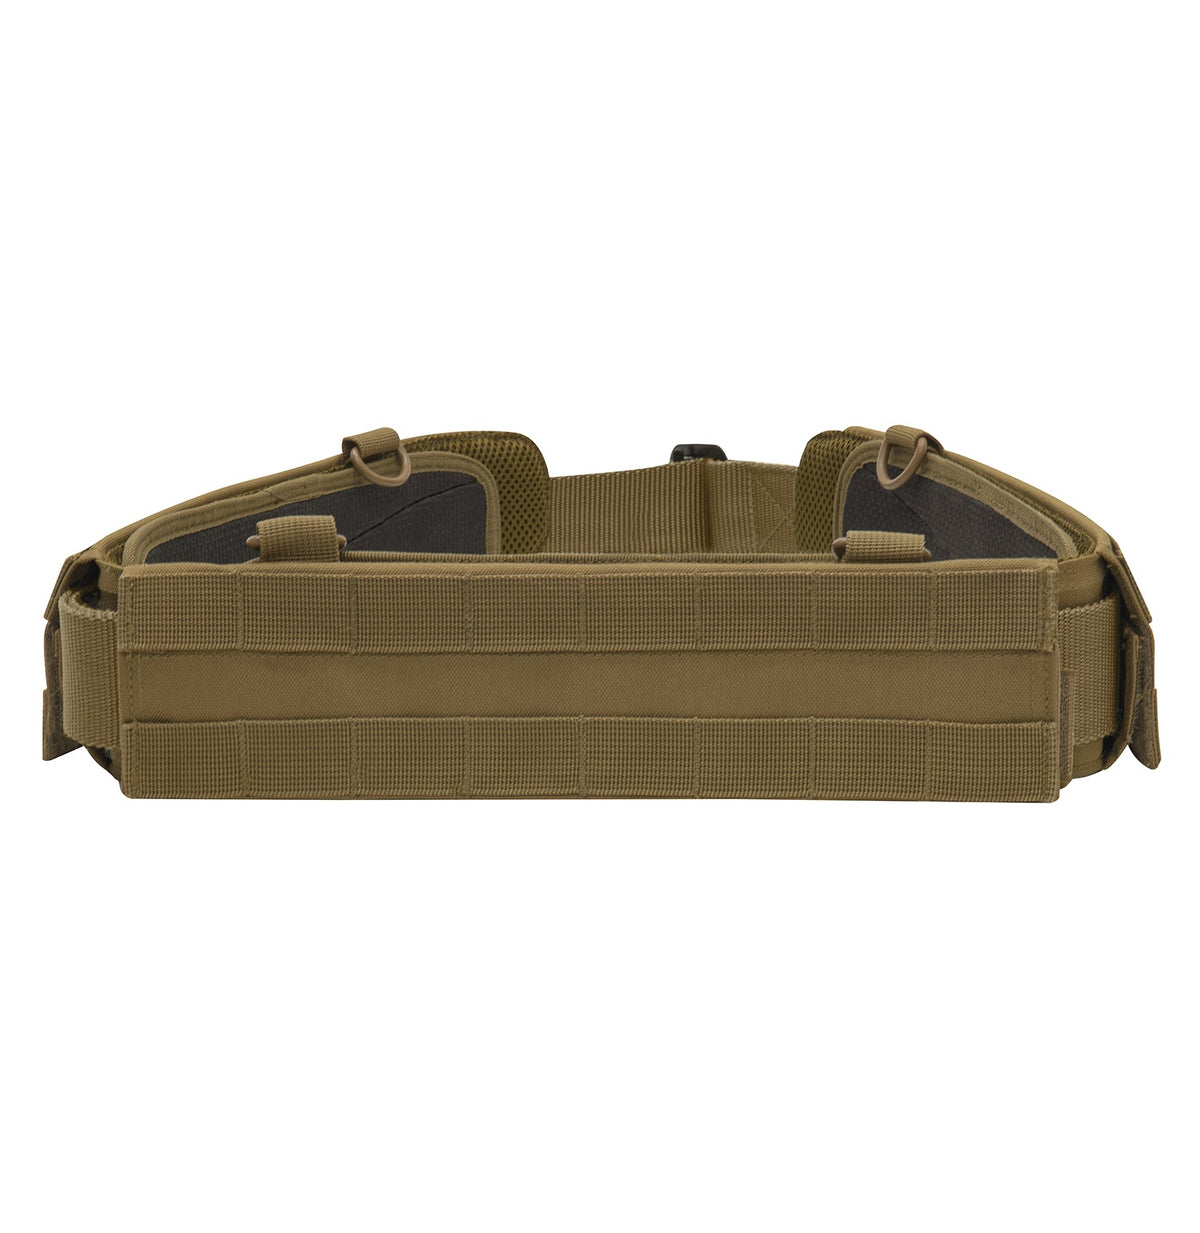 Rothco MOLLE Lightweight Low Profile Tactical Battle Belt Coyote Brown